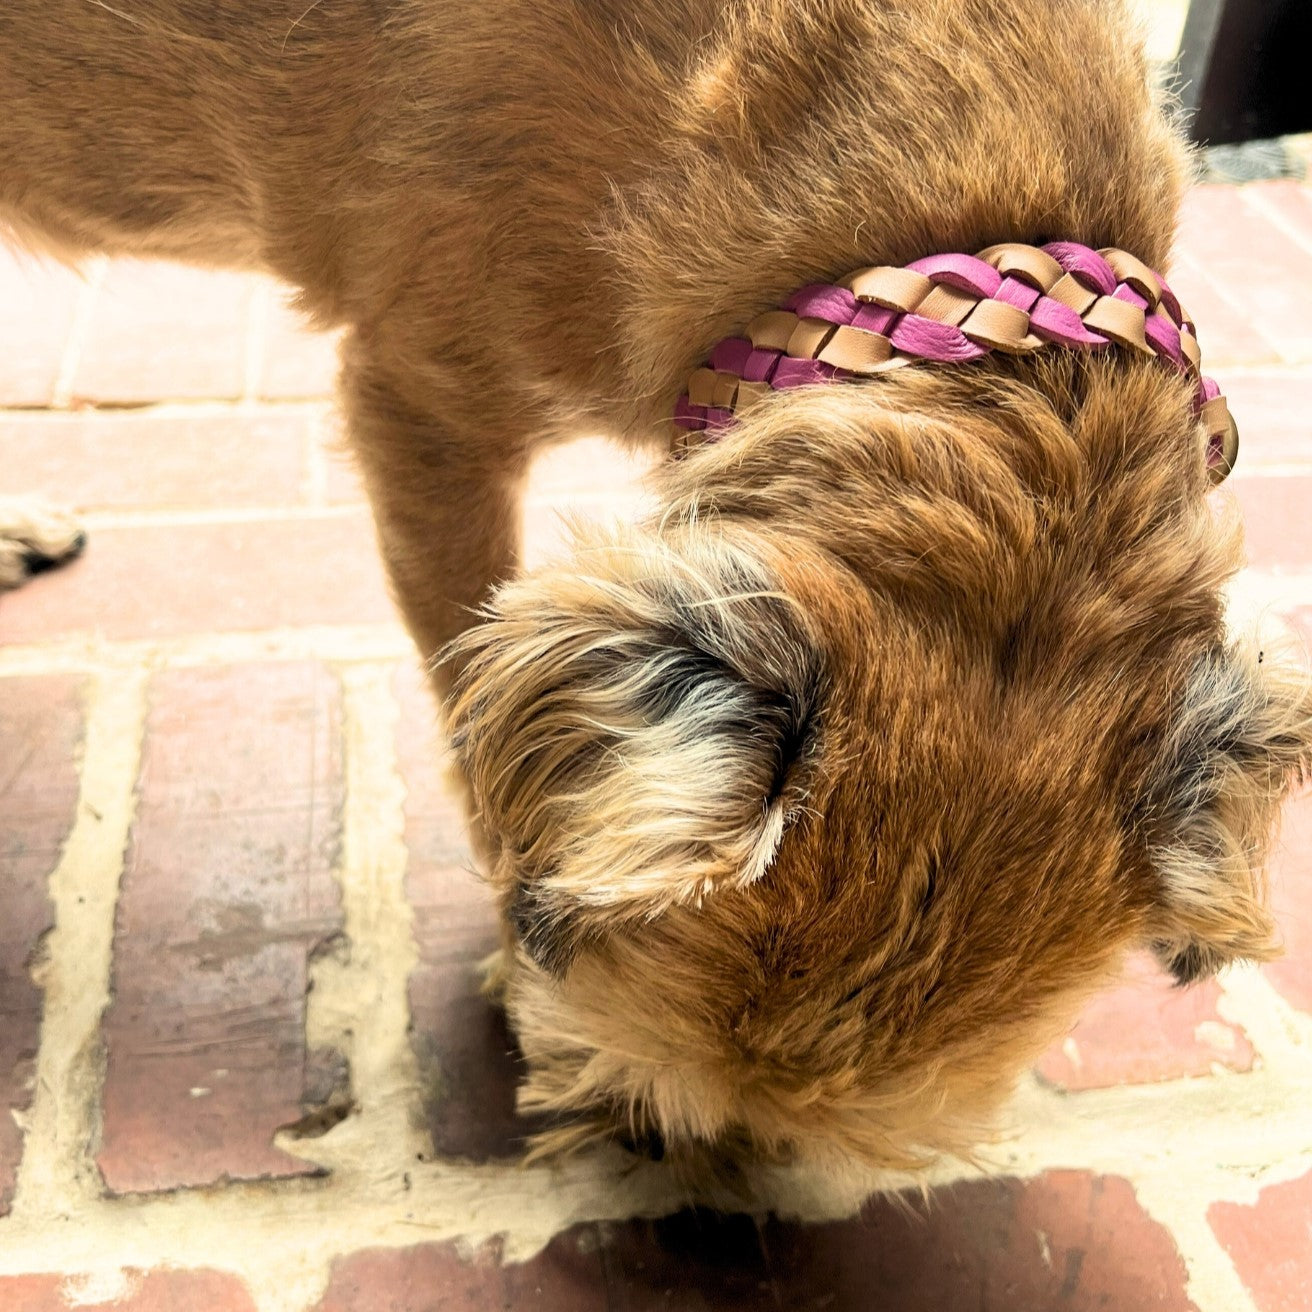 A brown and tan puppy with a braided Georgie Paws Buffalo Leather collar stands on a brick surface, its head turned away from the camera, showcasing furry ears and the LuLu Collar's intricate hot pink design.